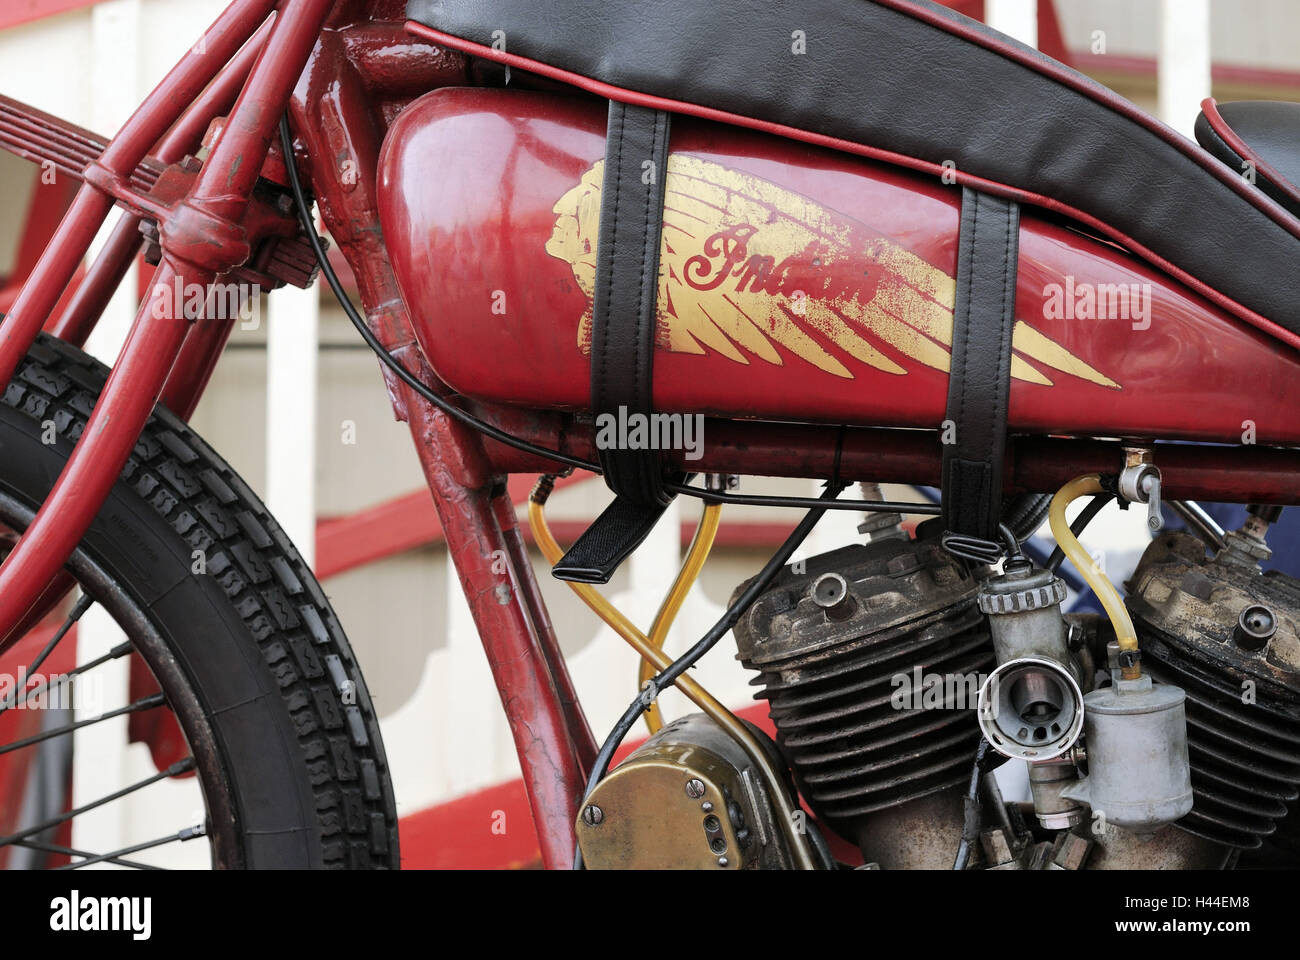 Motorcycle, detail, engine, cylinder, tank, carburettor, tyre, Indian, red, old, stroke, motorcycle show, Oktoberfest, Munich, Bavaria, Germany, Stock Photo